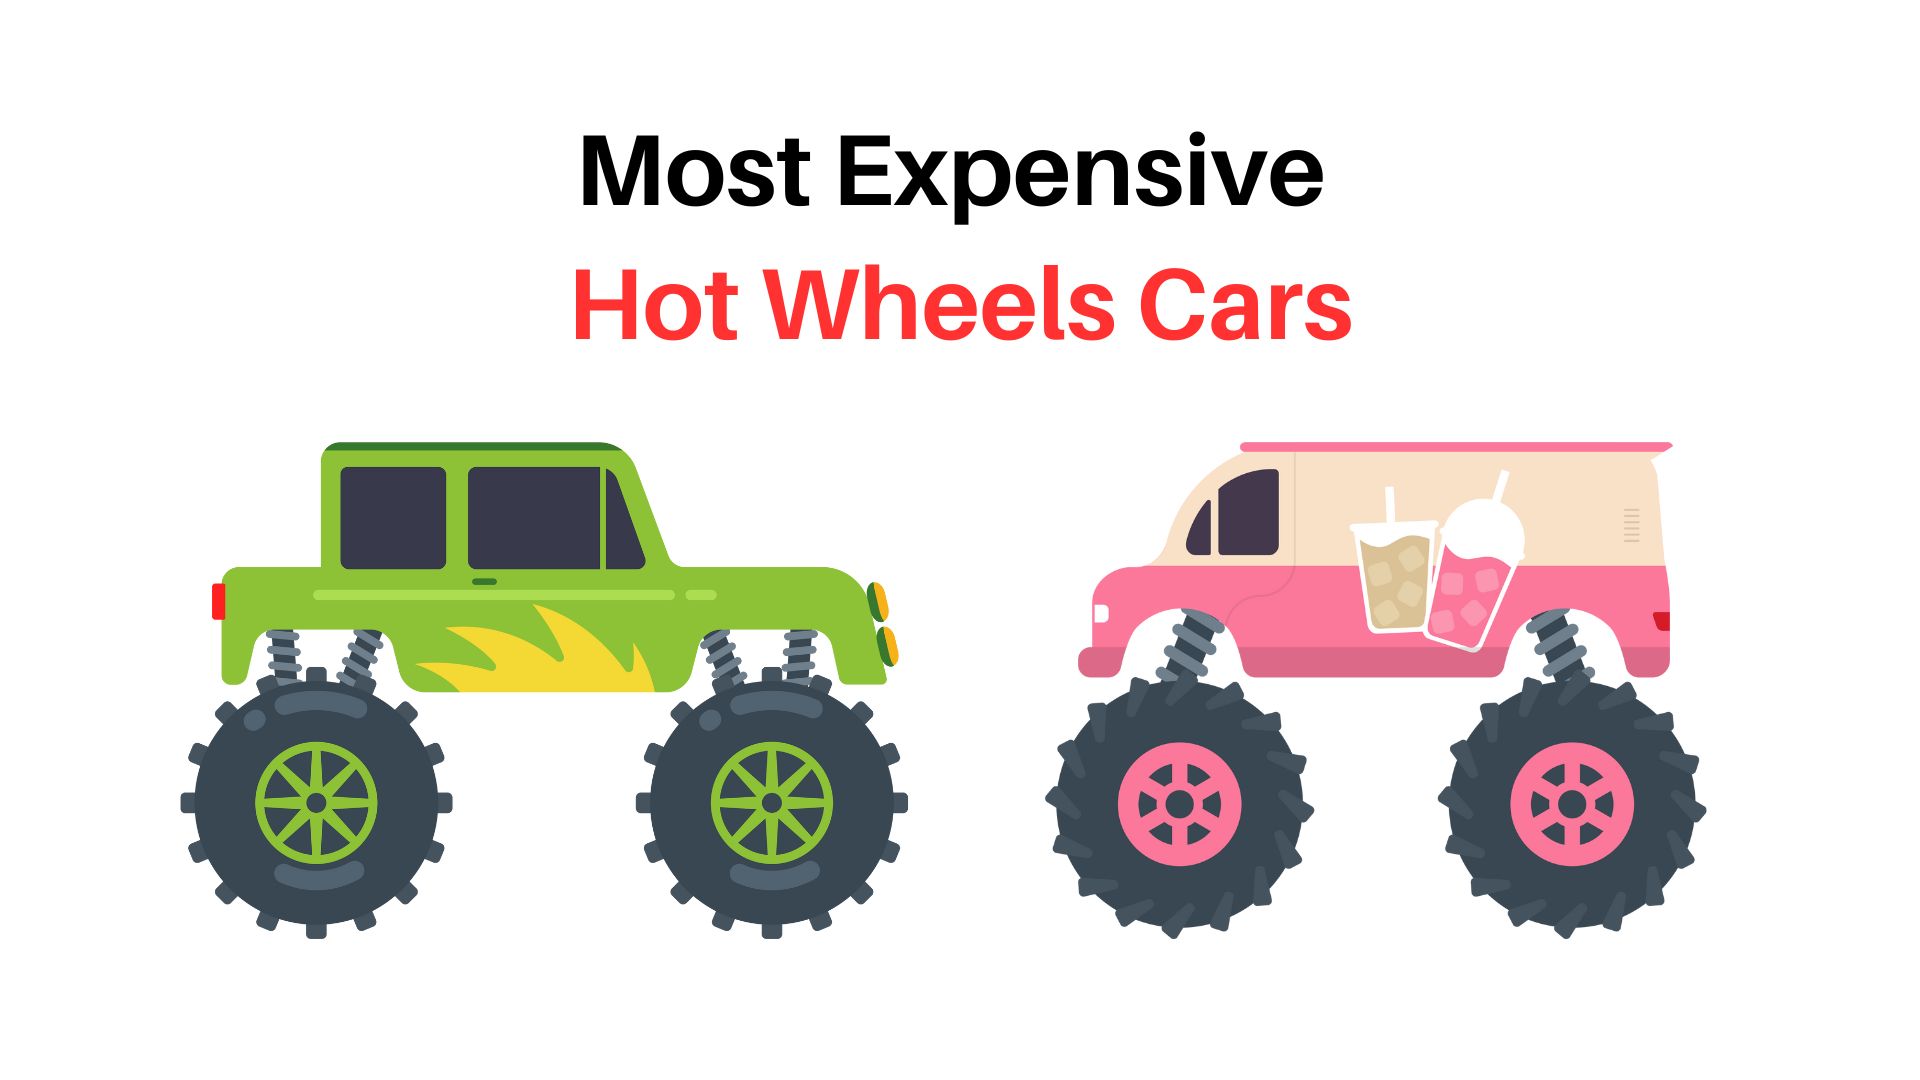 Most expensive toys in the world​